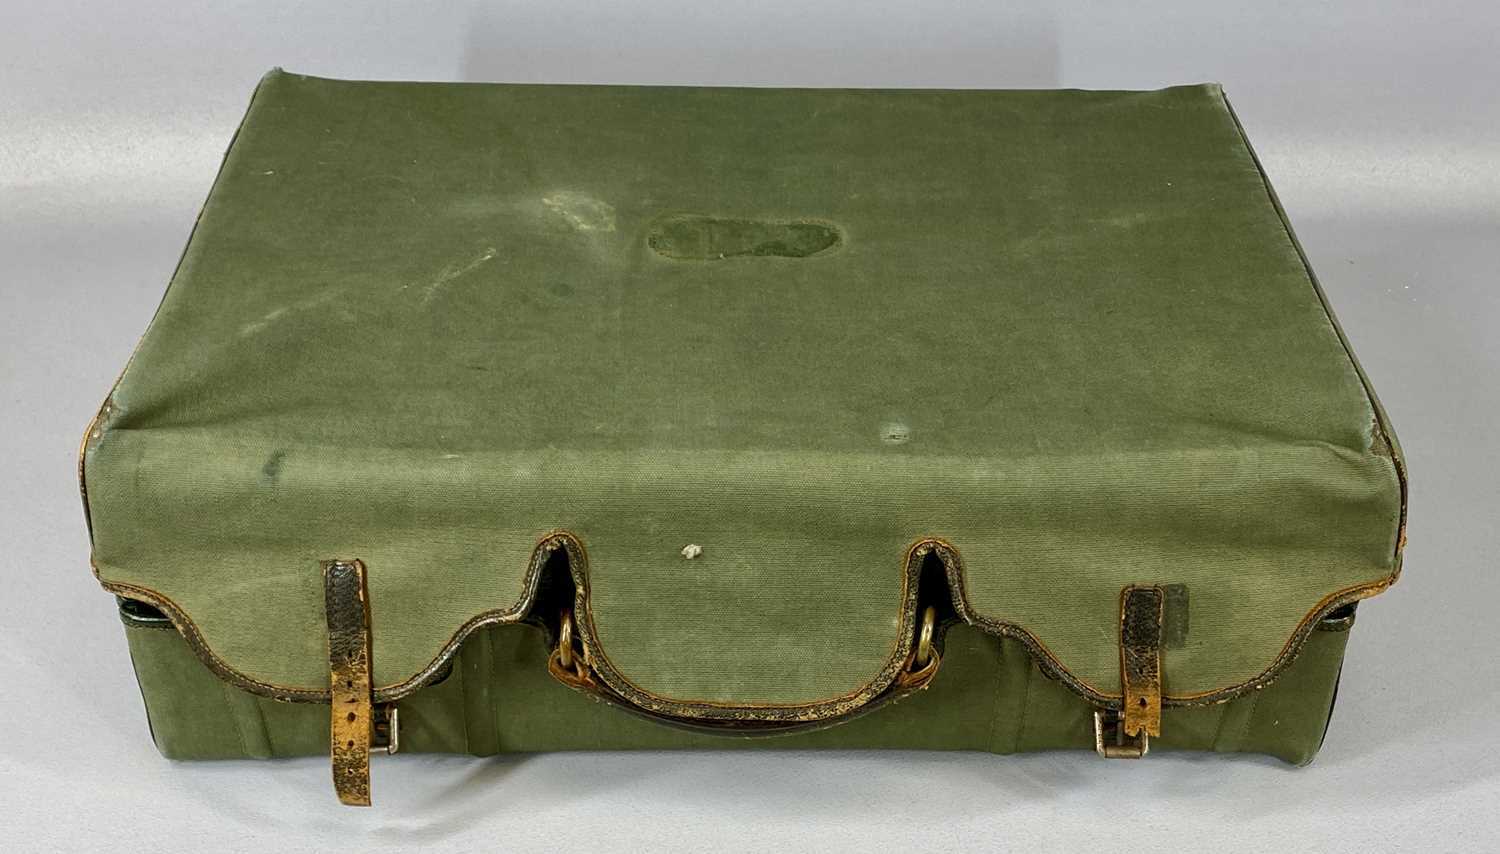 FINNIGAN'S LIMITED LADIES GREEN LEATHER TRAVELLING CASE, initialled with canvas cover, monogrammed - Image 4 of 4